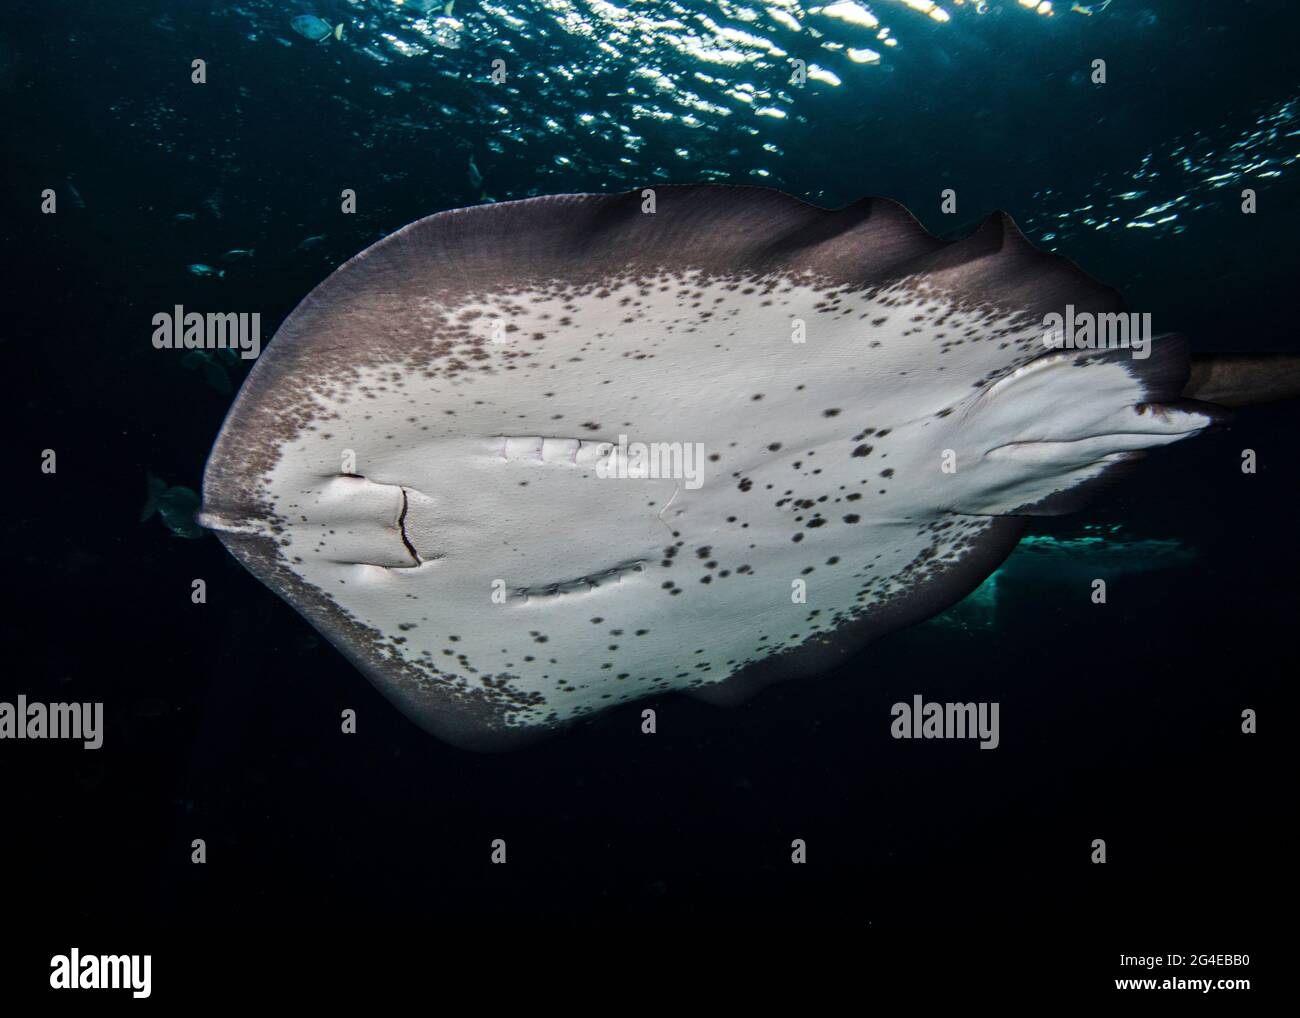 A shorttail stingray (Bathytoshia brevicaudata) from below with the water surface visible in the background Stock Photo